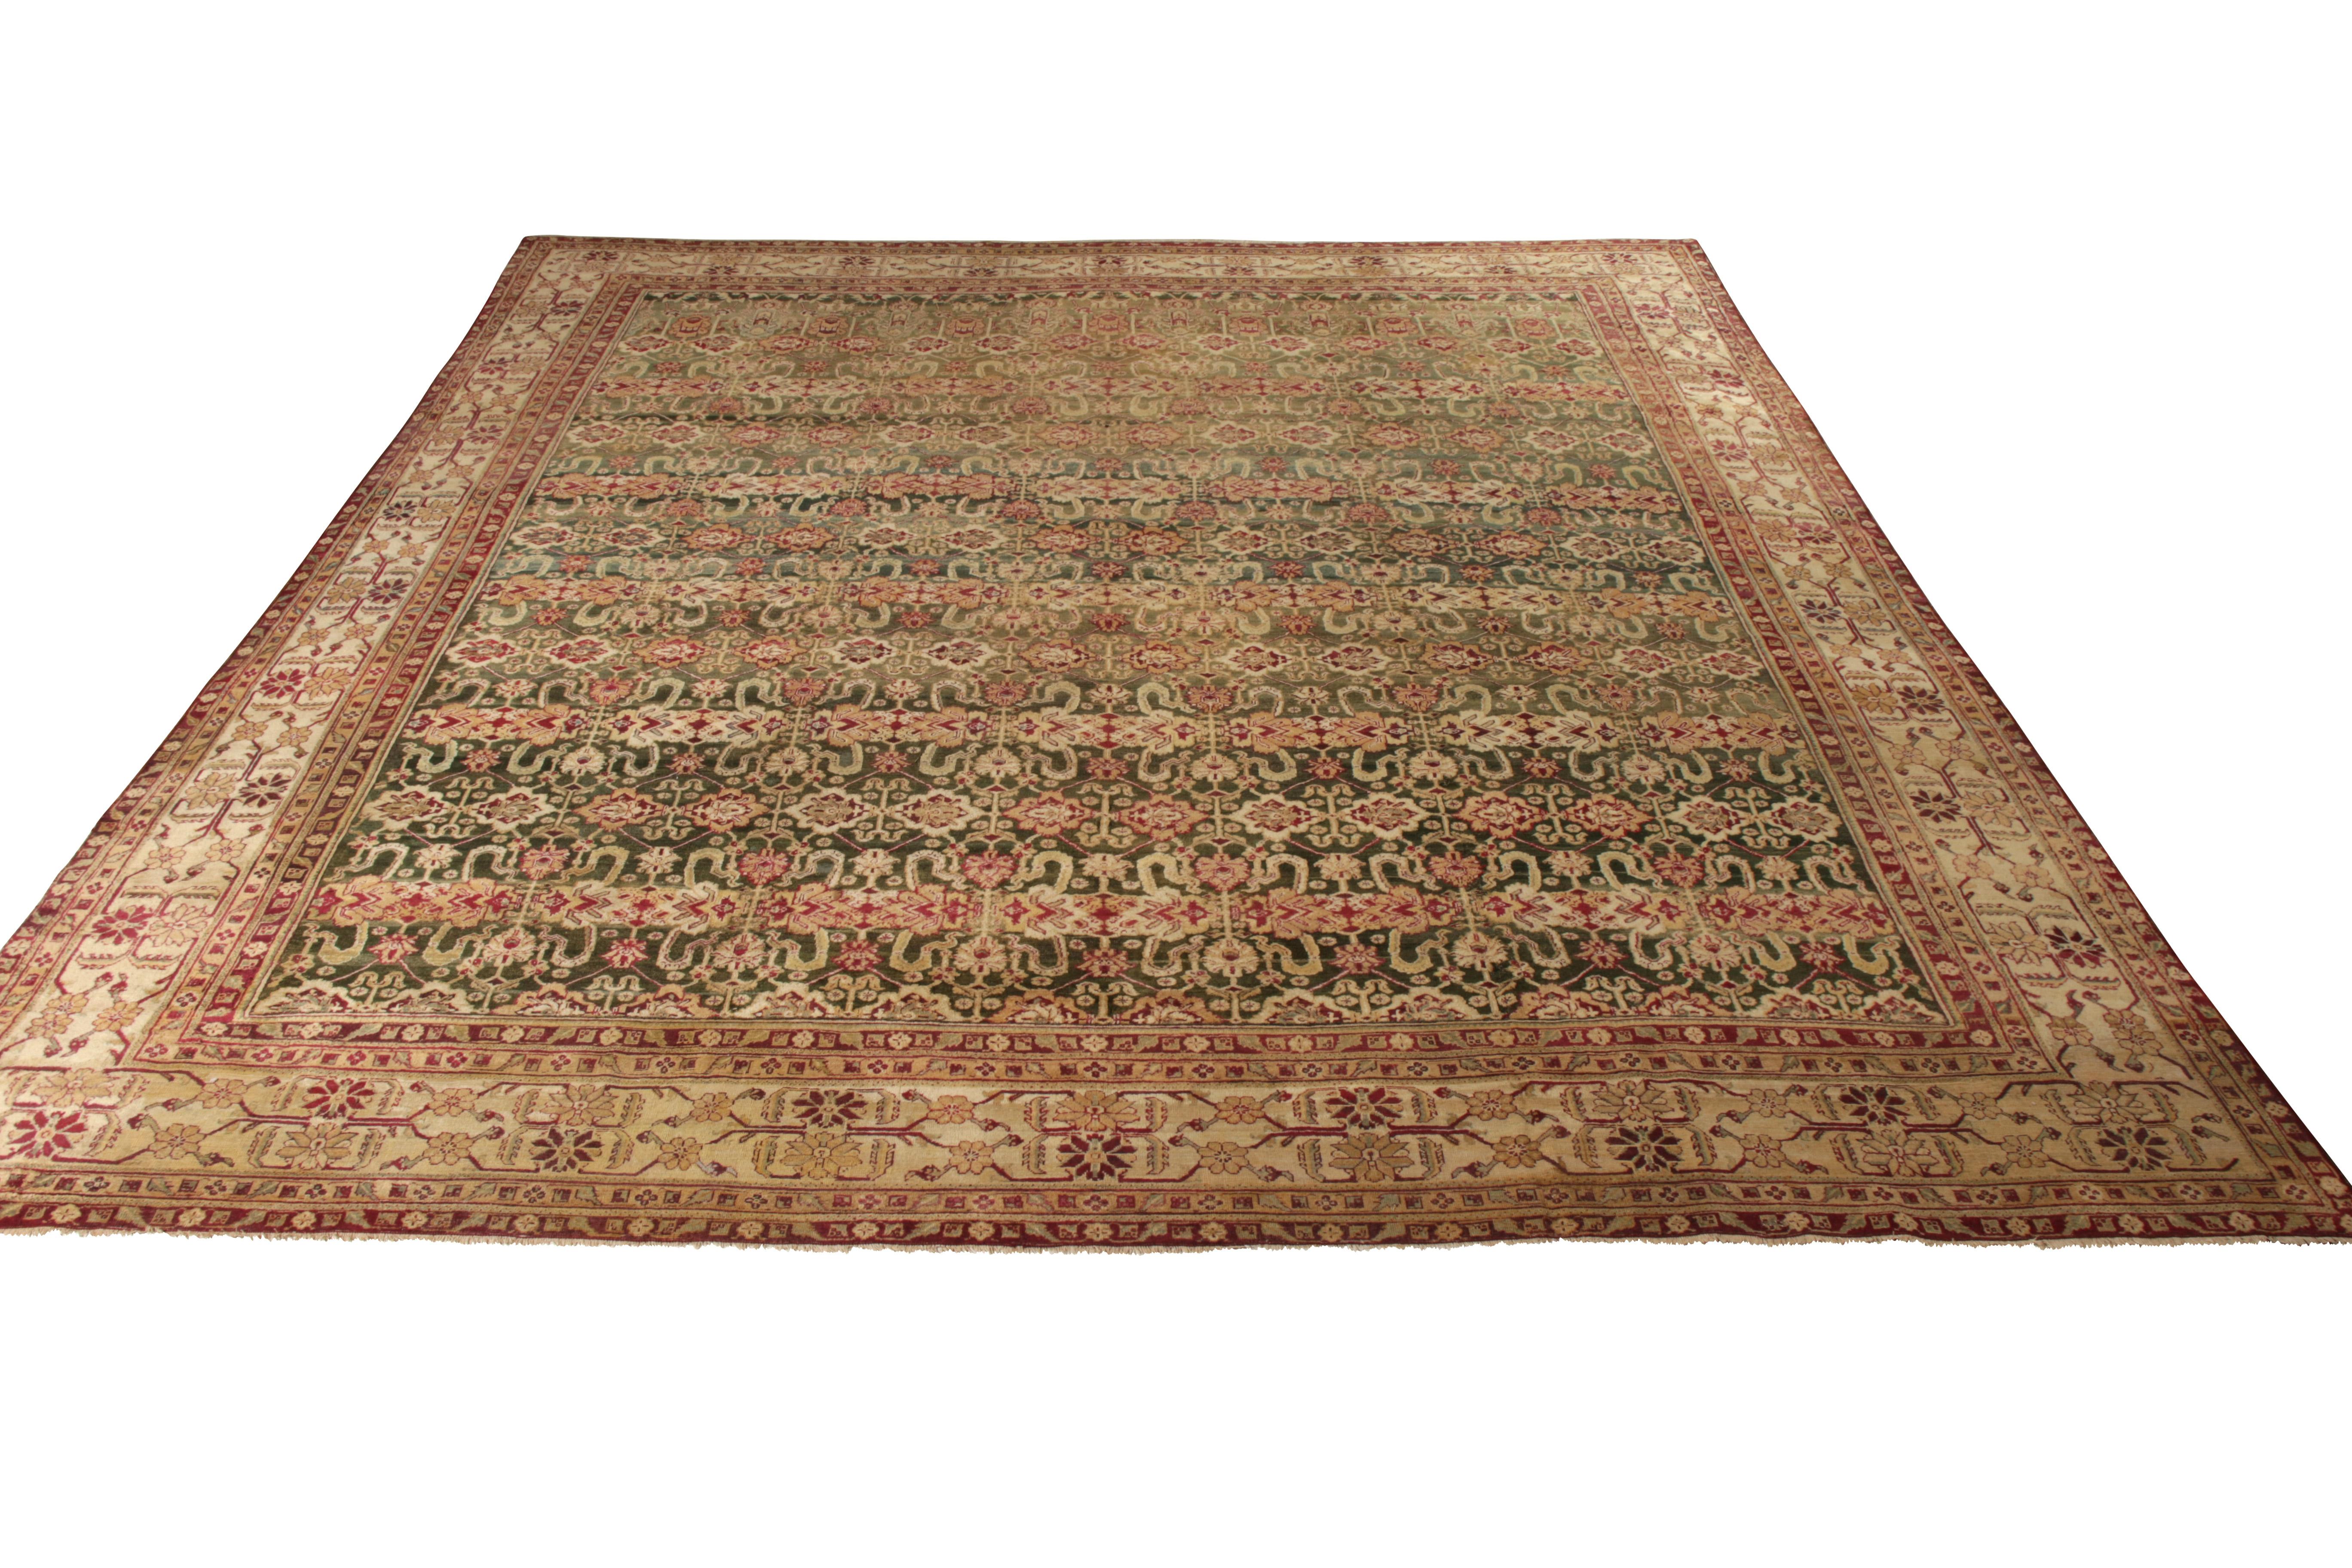 Hand knotted in wool originating from India circa 1870-1880, this 13 x 14 antique rug connotes a traditional Agra rug design enjoying a subtle European influence in the hypnotic, intricate field repetition and the subtle variation of warm and rich